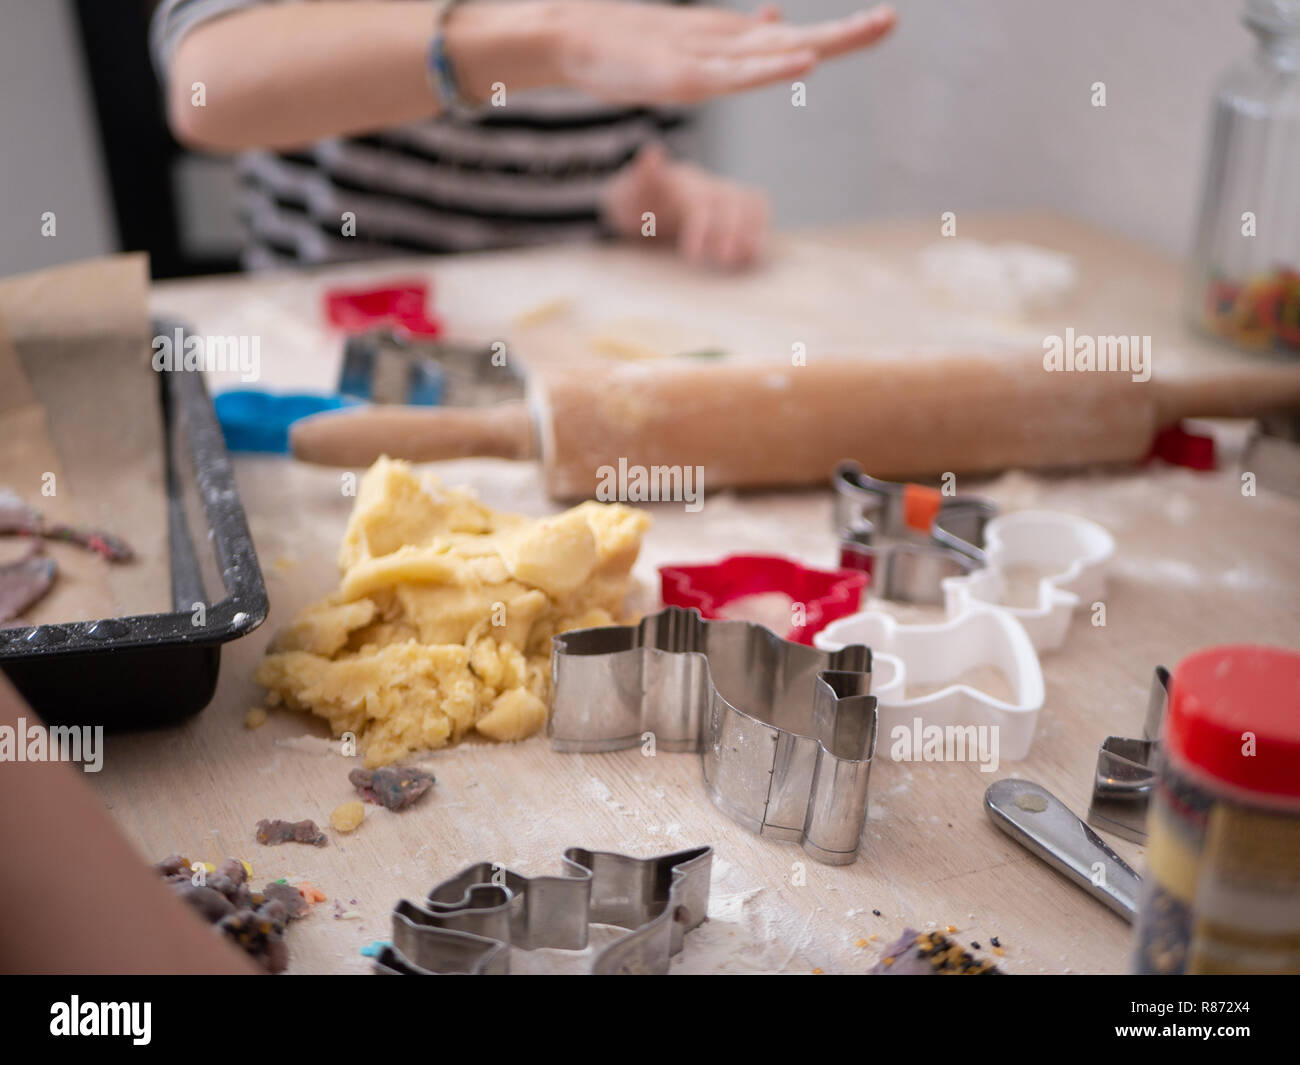 Christmas Chaos: Baking supplies in foreground and little girl forming cookie dough in background Stock Photo